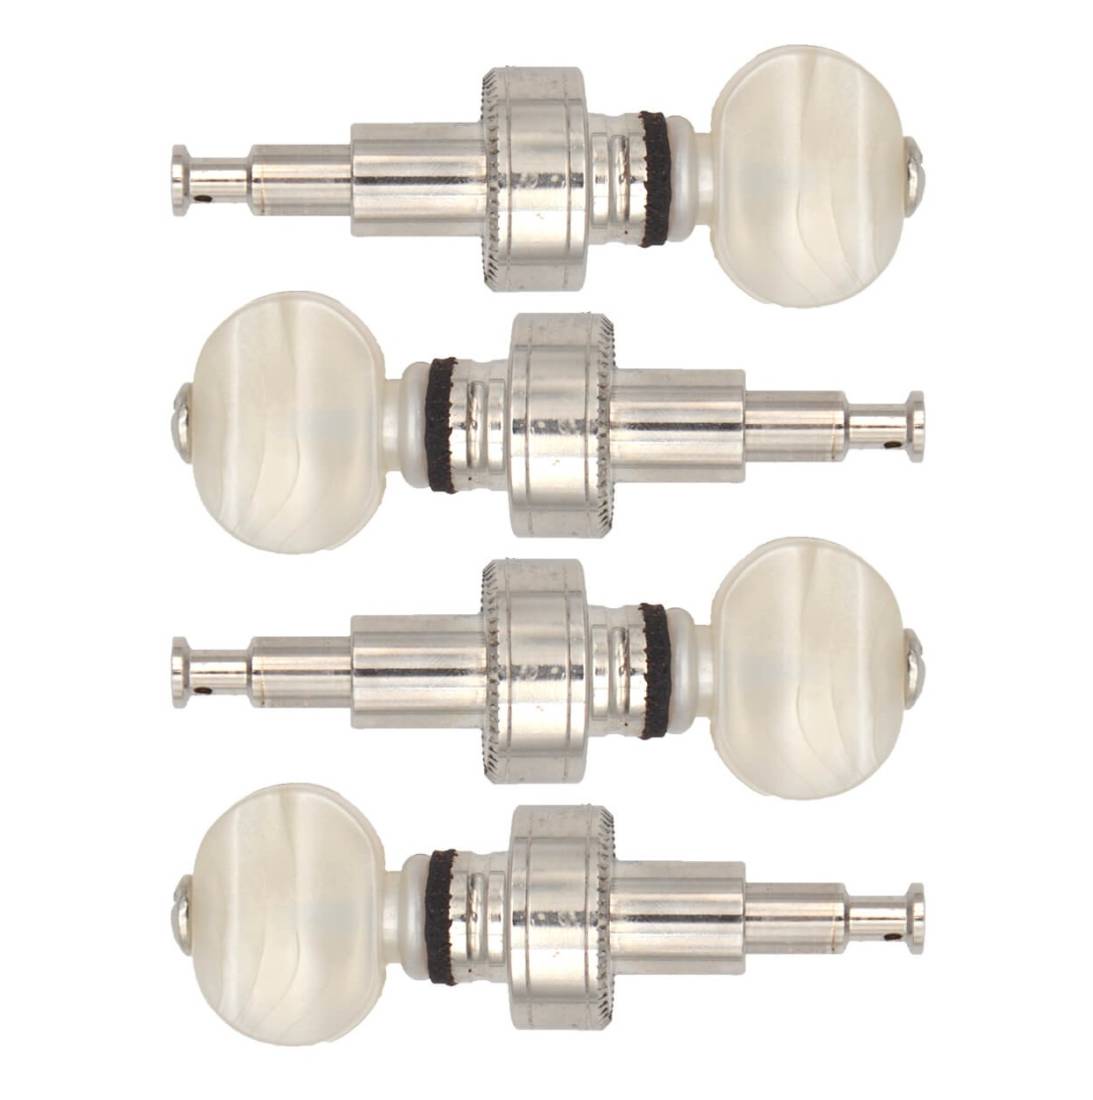 Gold Tone Master Planetary Banjo Tuner Pegs - Nickel Plated (Set Of Four)